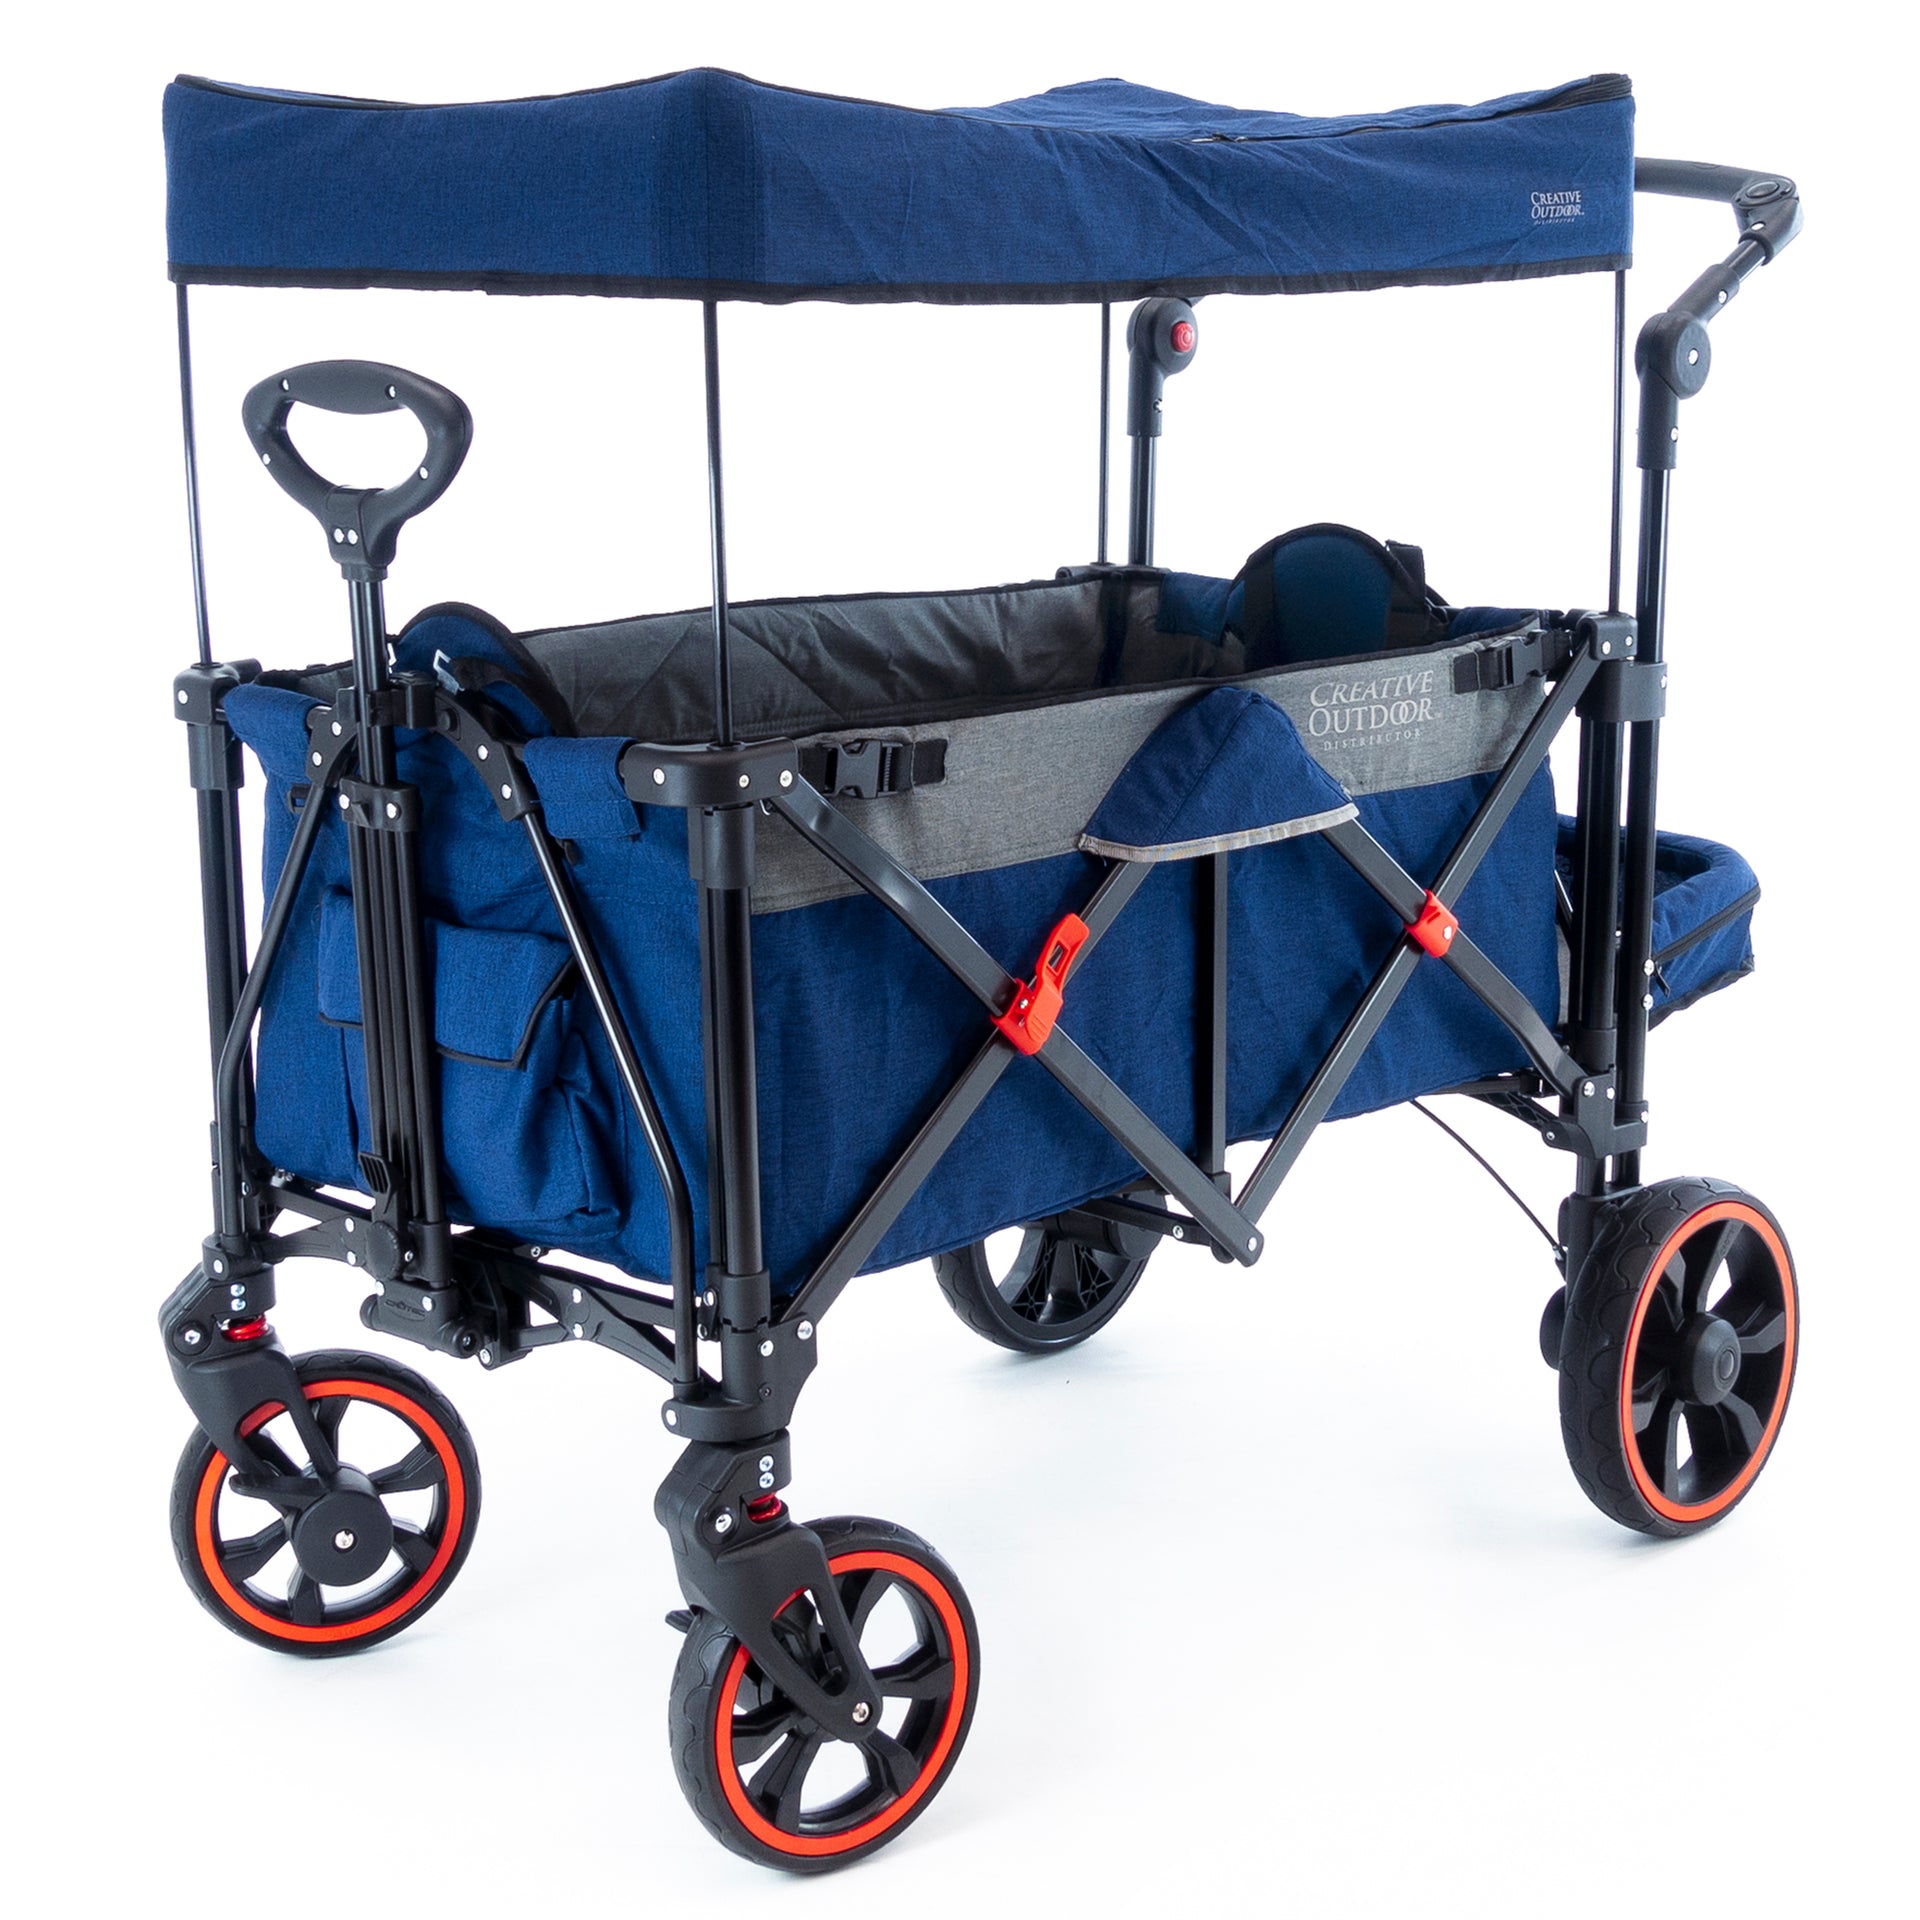 Push Pull Folding Stroller Wagon with Canopy – Creative Wagons